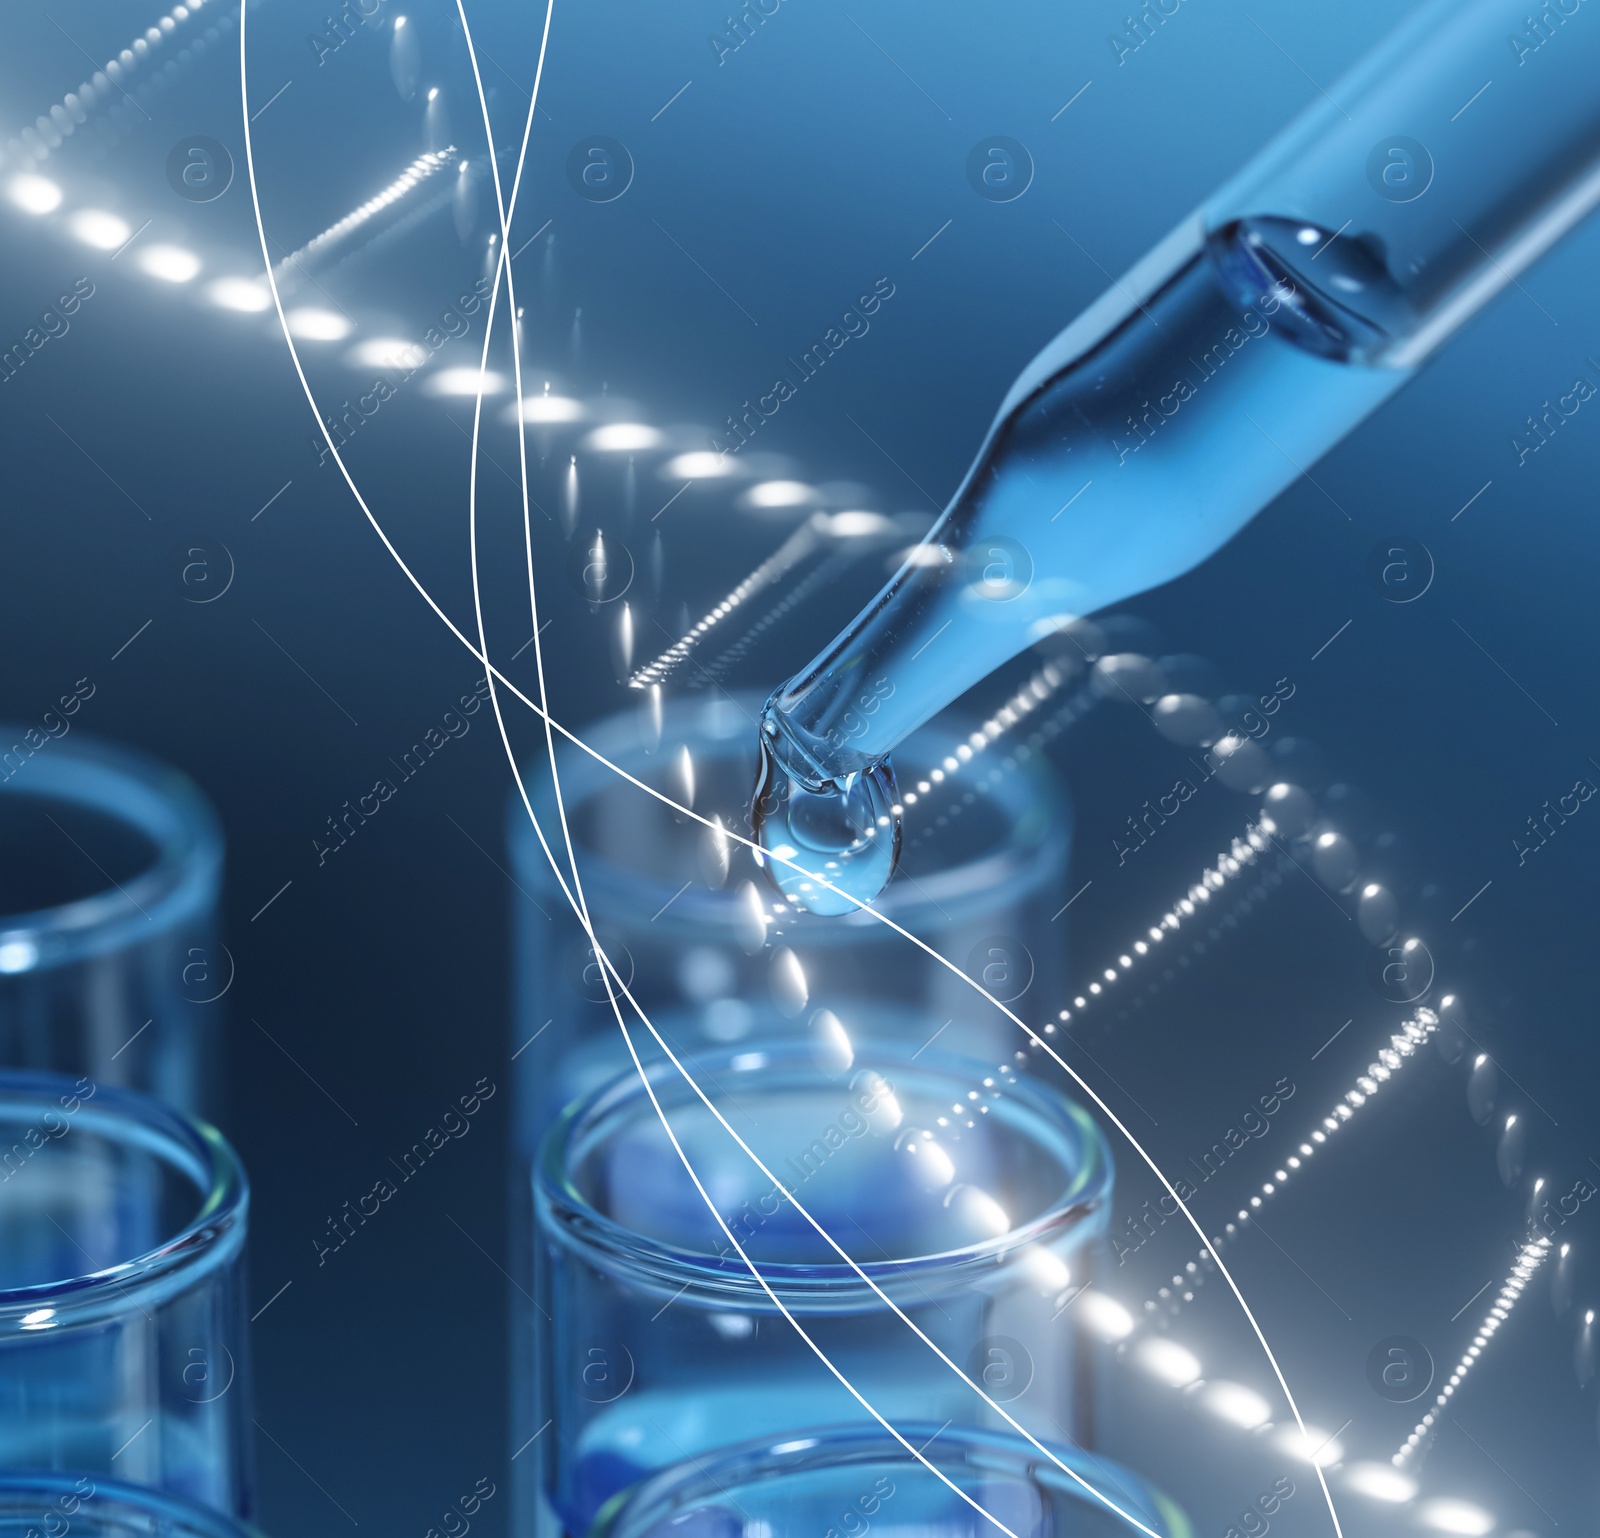 Image of Studying chemistry. Dripping reagent into test tube and double helix illustration, double exposure